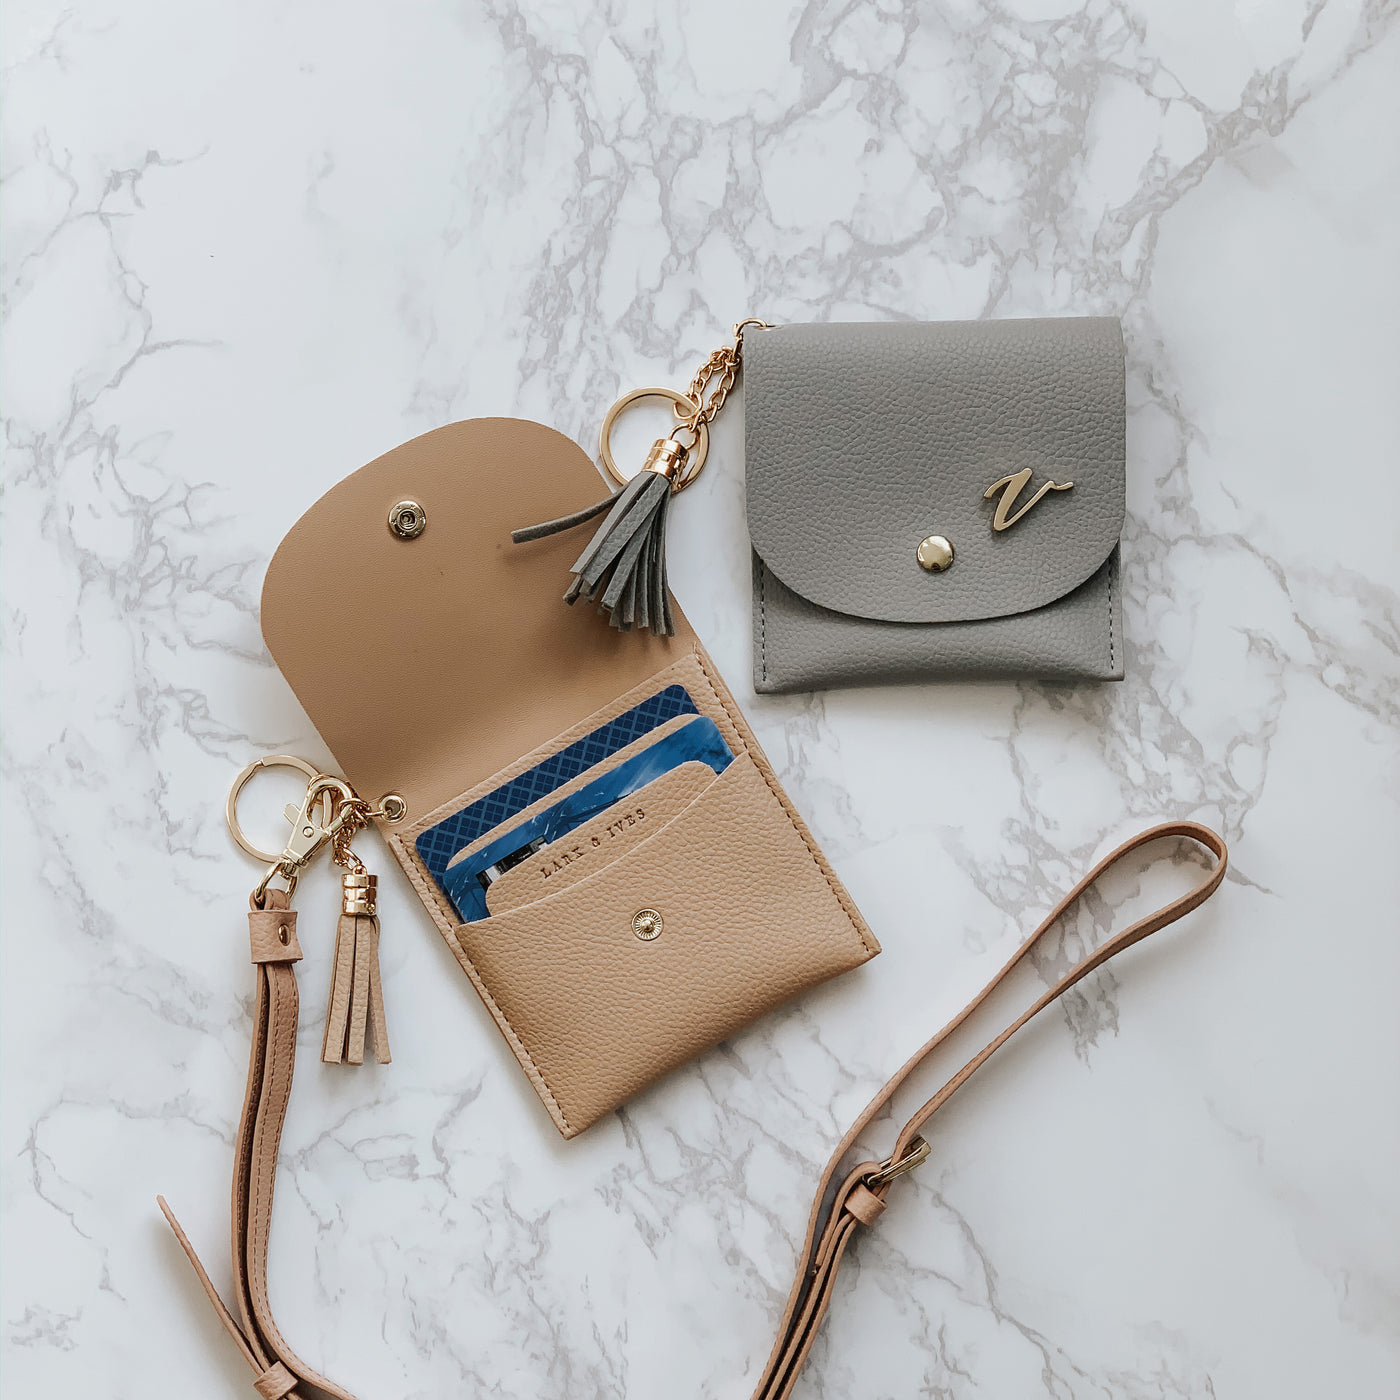 Lark and Ives / Vegan Leather Accessories / Card Purse with Lanyard Strap and Gold Monogram Pin / Card Case /  Brown and Grey Card Purses